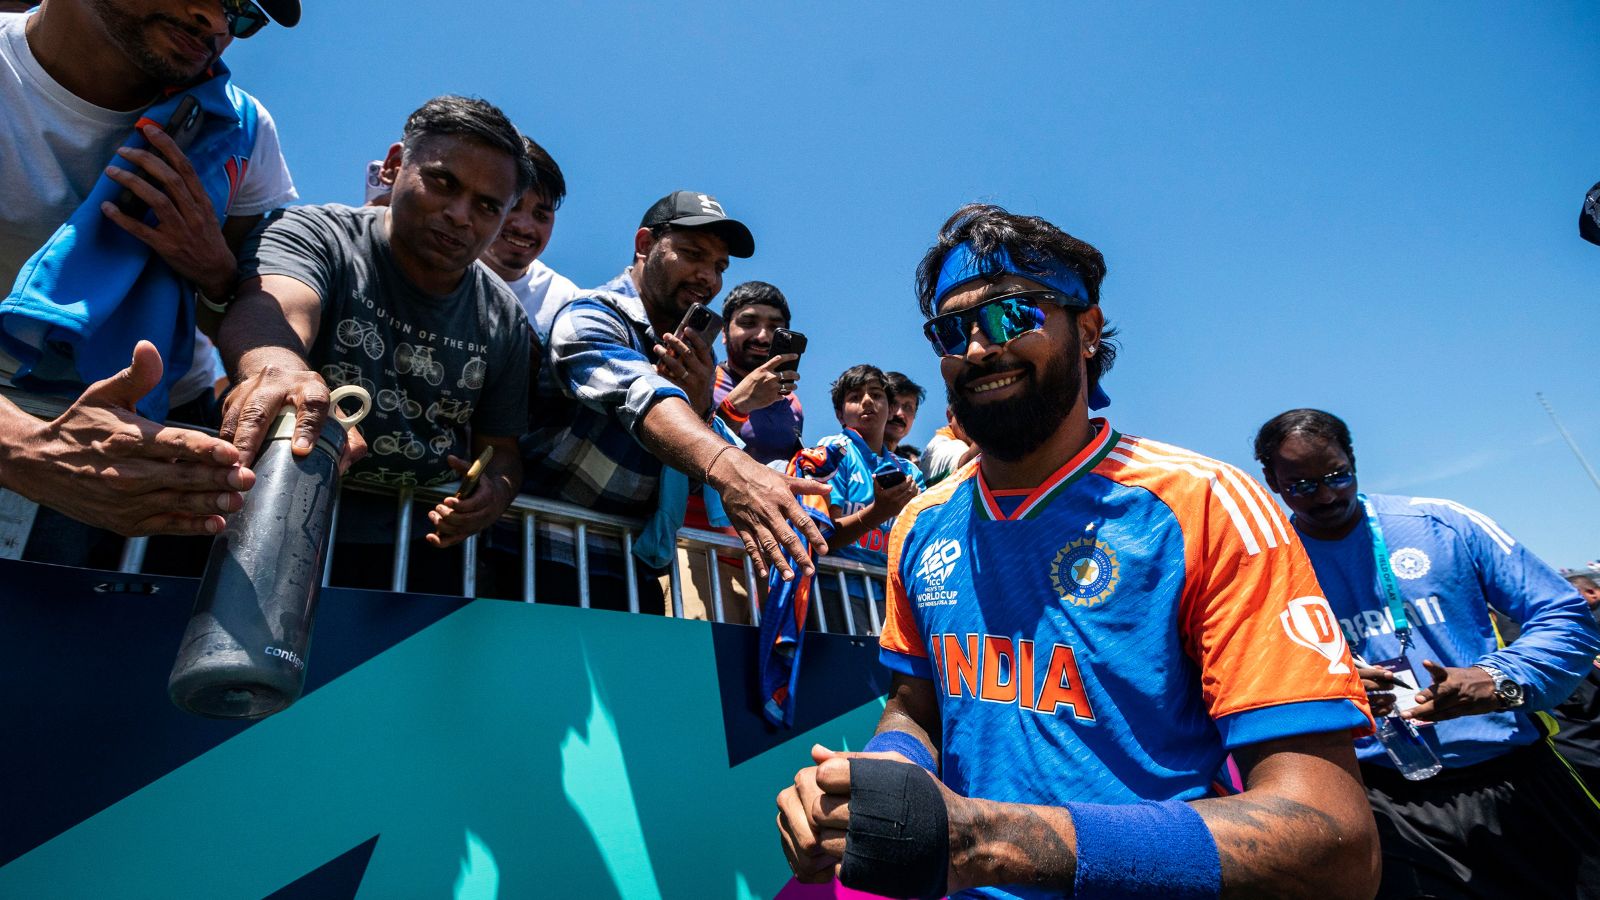 Hardik Pandya boasts of World Cup success after 3-wicket haul against Ireland: ‘India dominates on the global stage’ | Cricket News